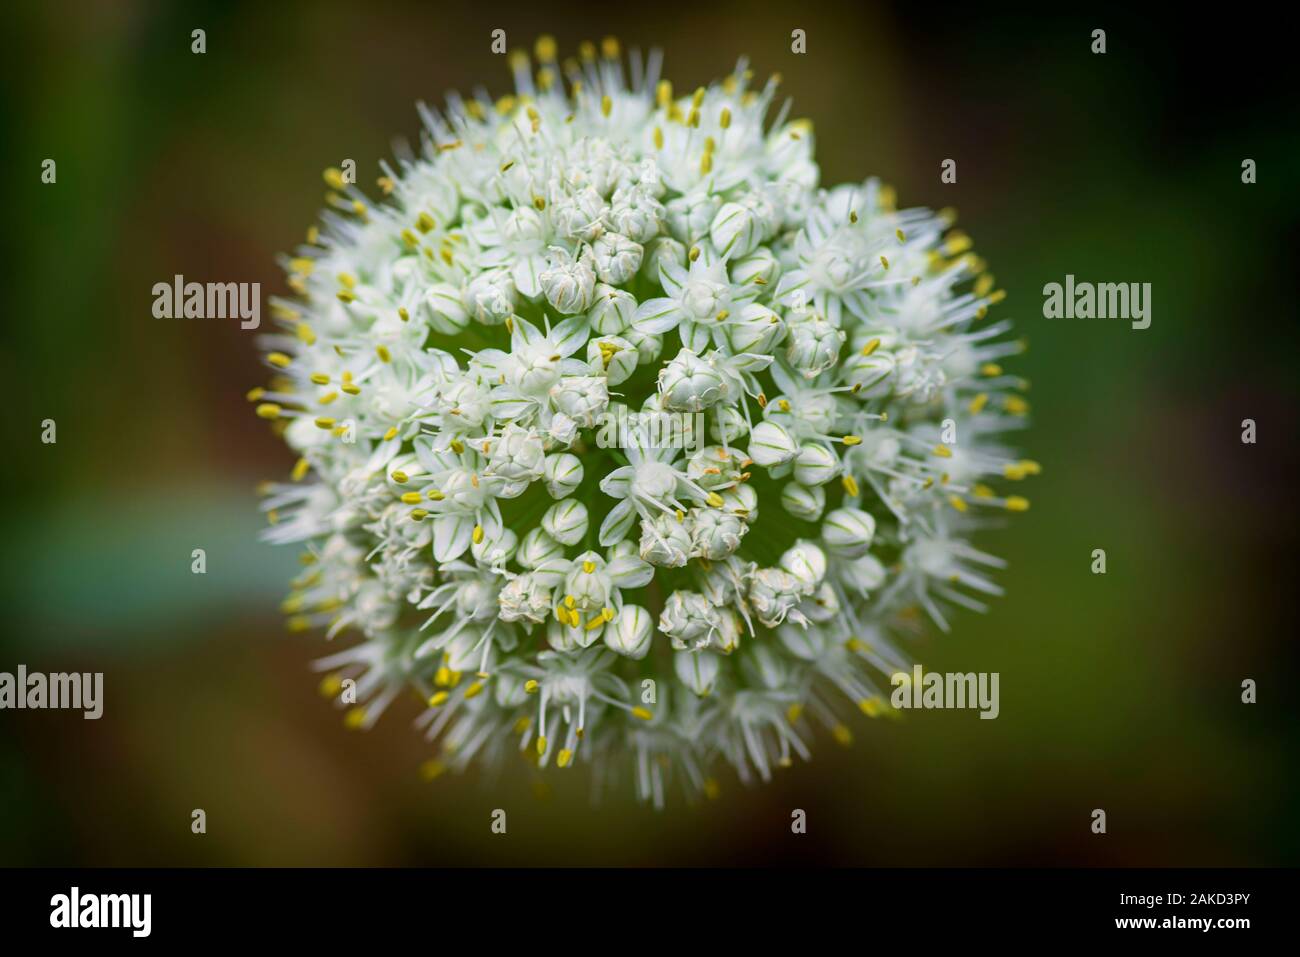 Macro image.Close-up with the prospect of decorative onion flowers blooming in a summer. Allium nigrum flower buds in summer. Stock Photo